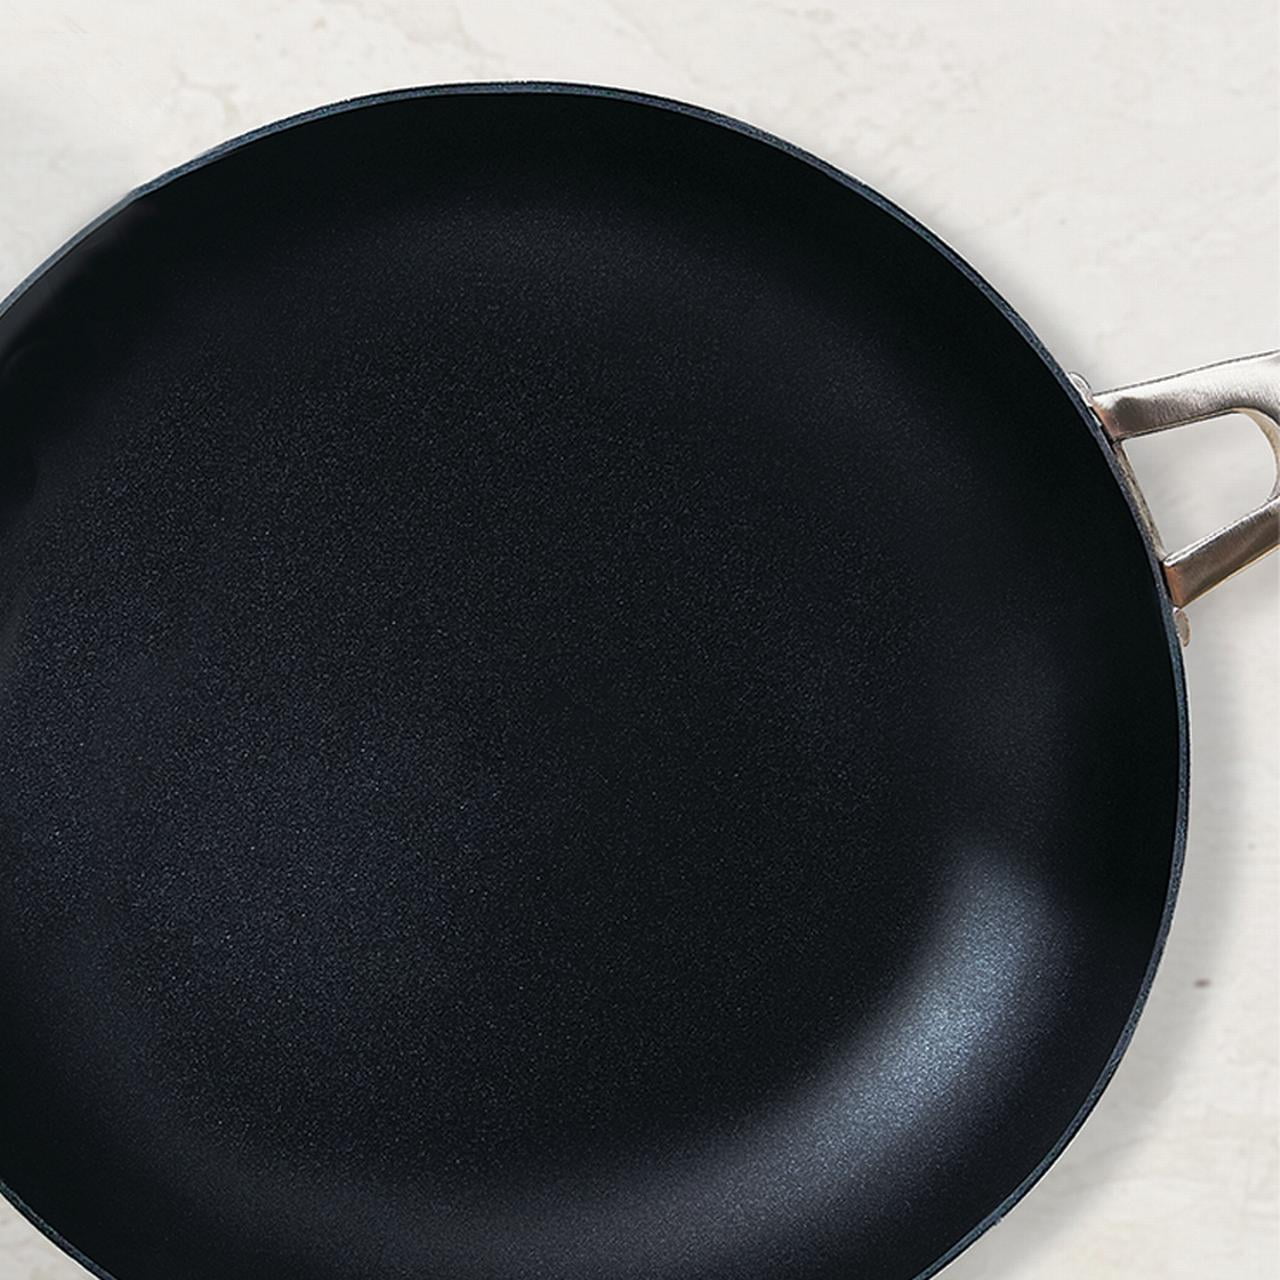 Emeril Lagasse Forever Pans Pro Hard-Anodized Nonstick 10 Frypan & Lid -  Macy's